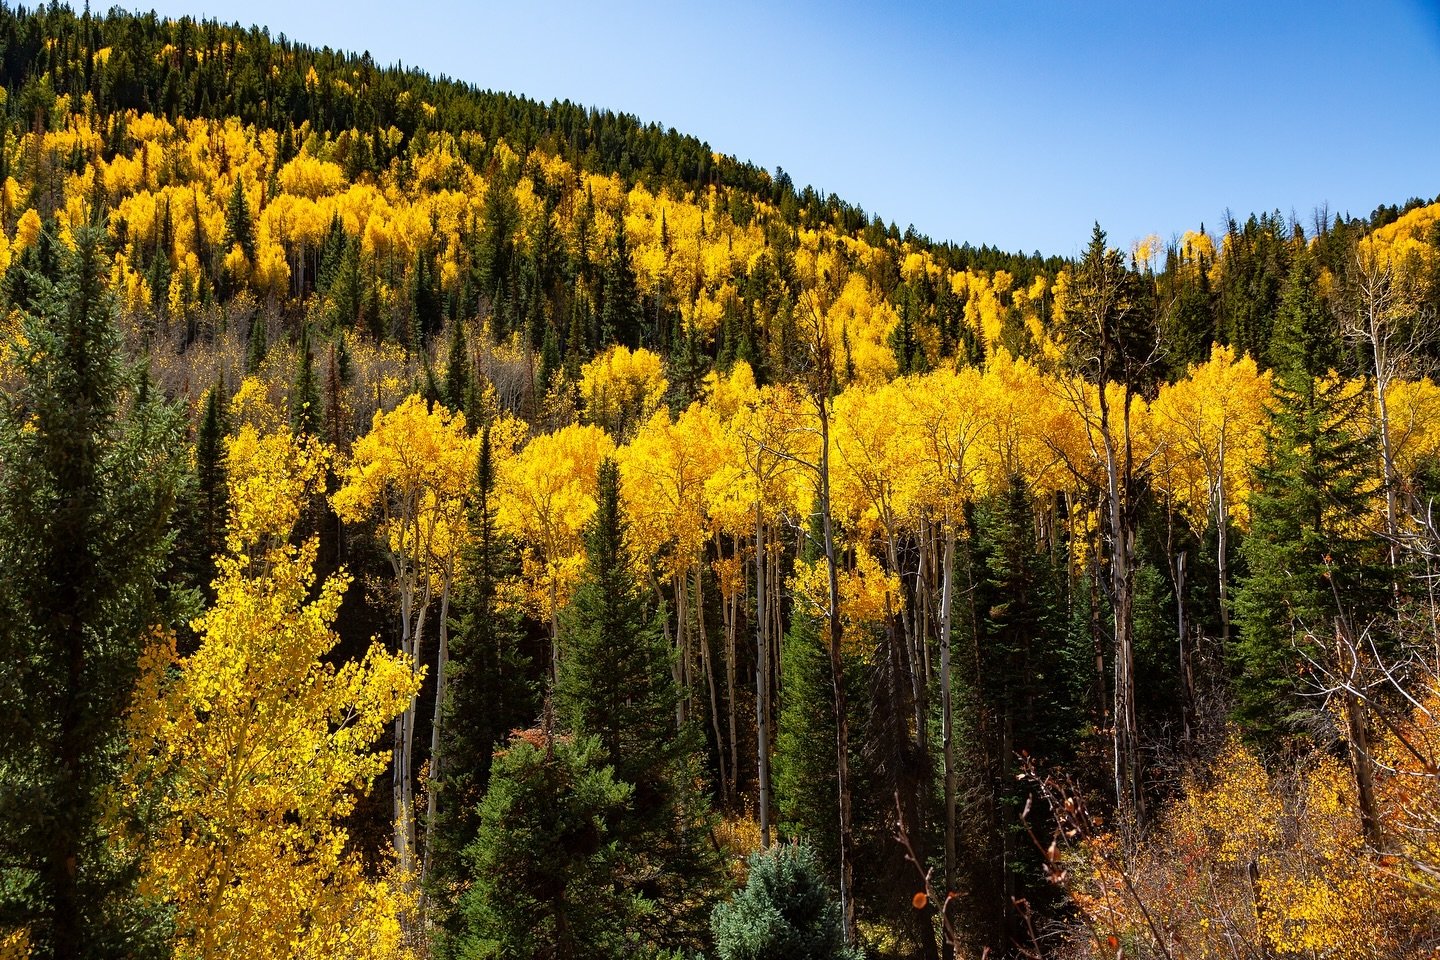 My time briefly living in Colorado was actually extremely emotionally difficult. During days alone this beautiful land held me and reminded me that like the Aspens I never stood alone.